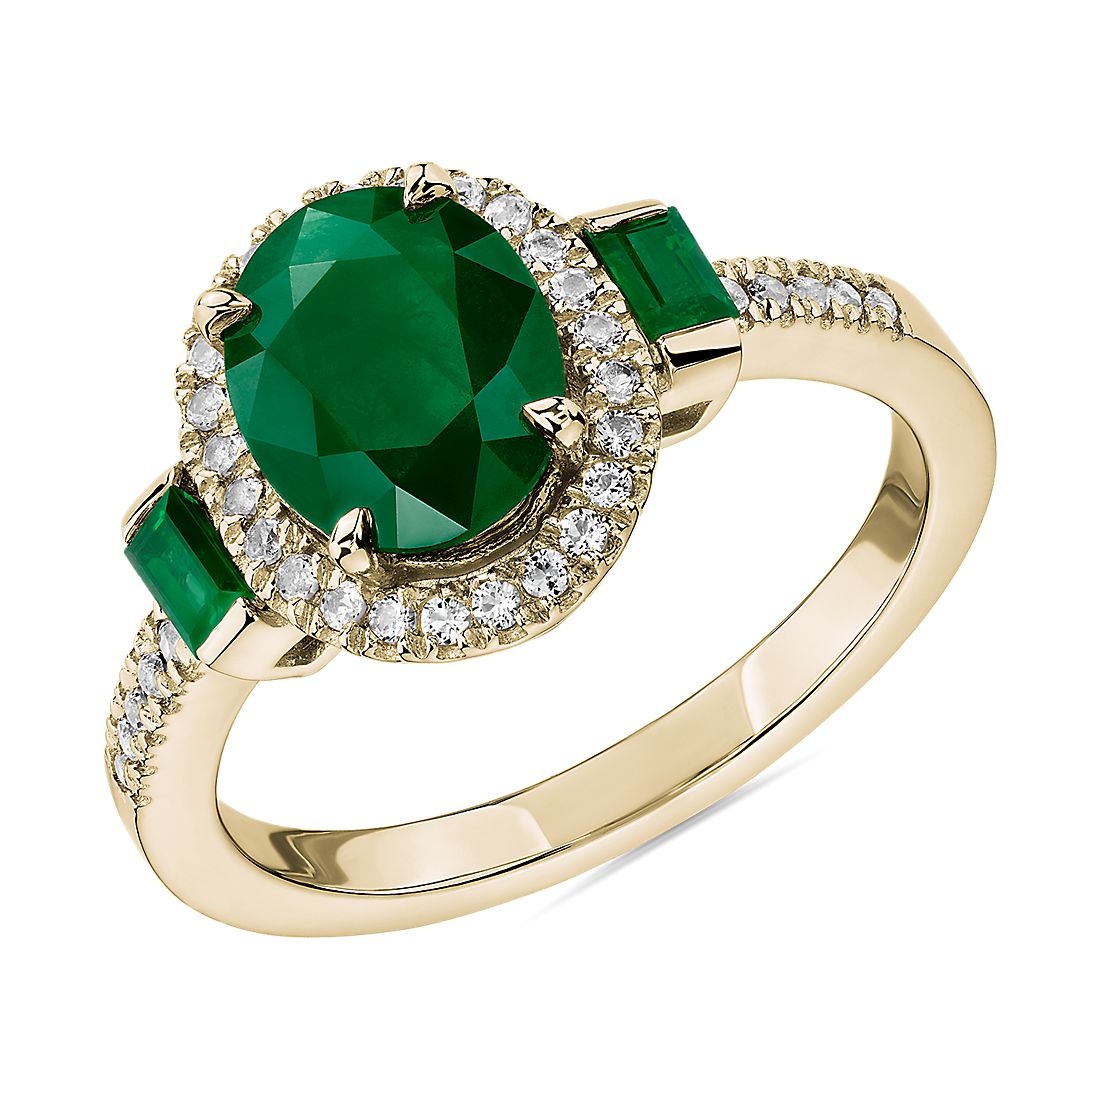 Oval and Baguette Emerald Ring in 14k Yellow Gold